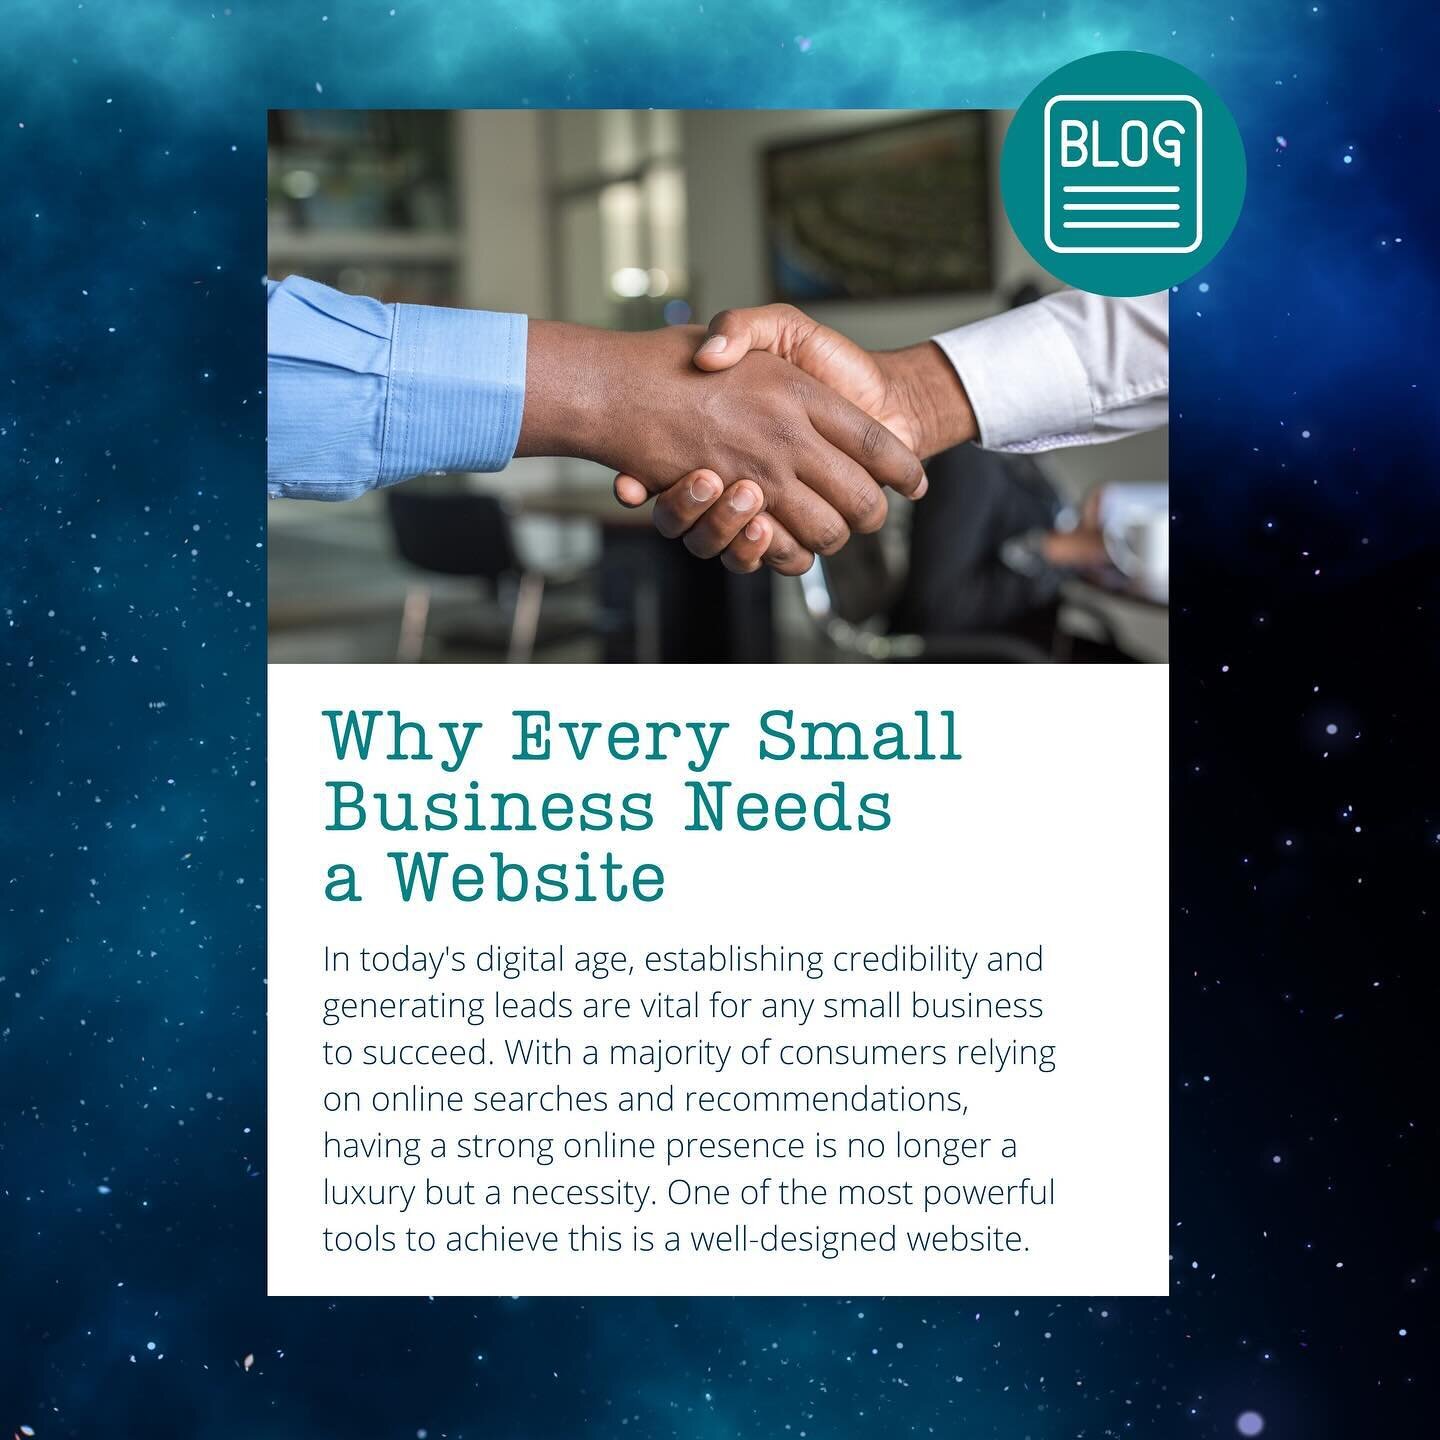 Learn how starting a small business necessitates having a website to establish credibility and generate leads and sales.

Comment &ldquo;READ NOW&rdquo; to get a link to our blog &ldquo;Why Every Small Business Needs a Website.&rdquo; ⤵️